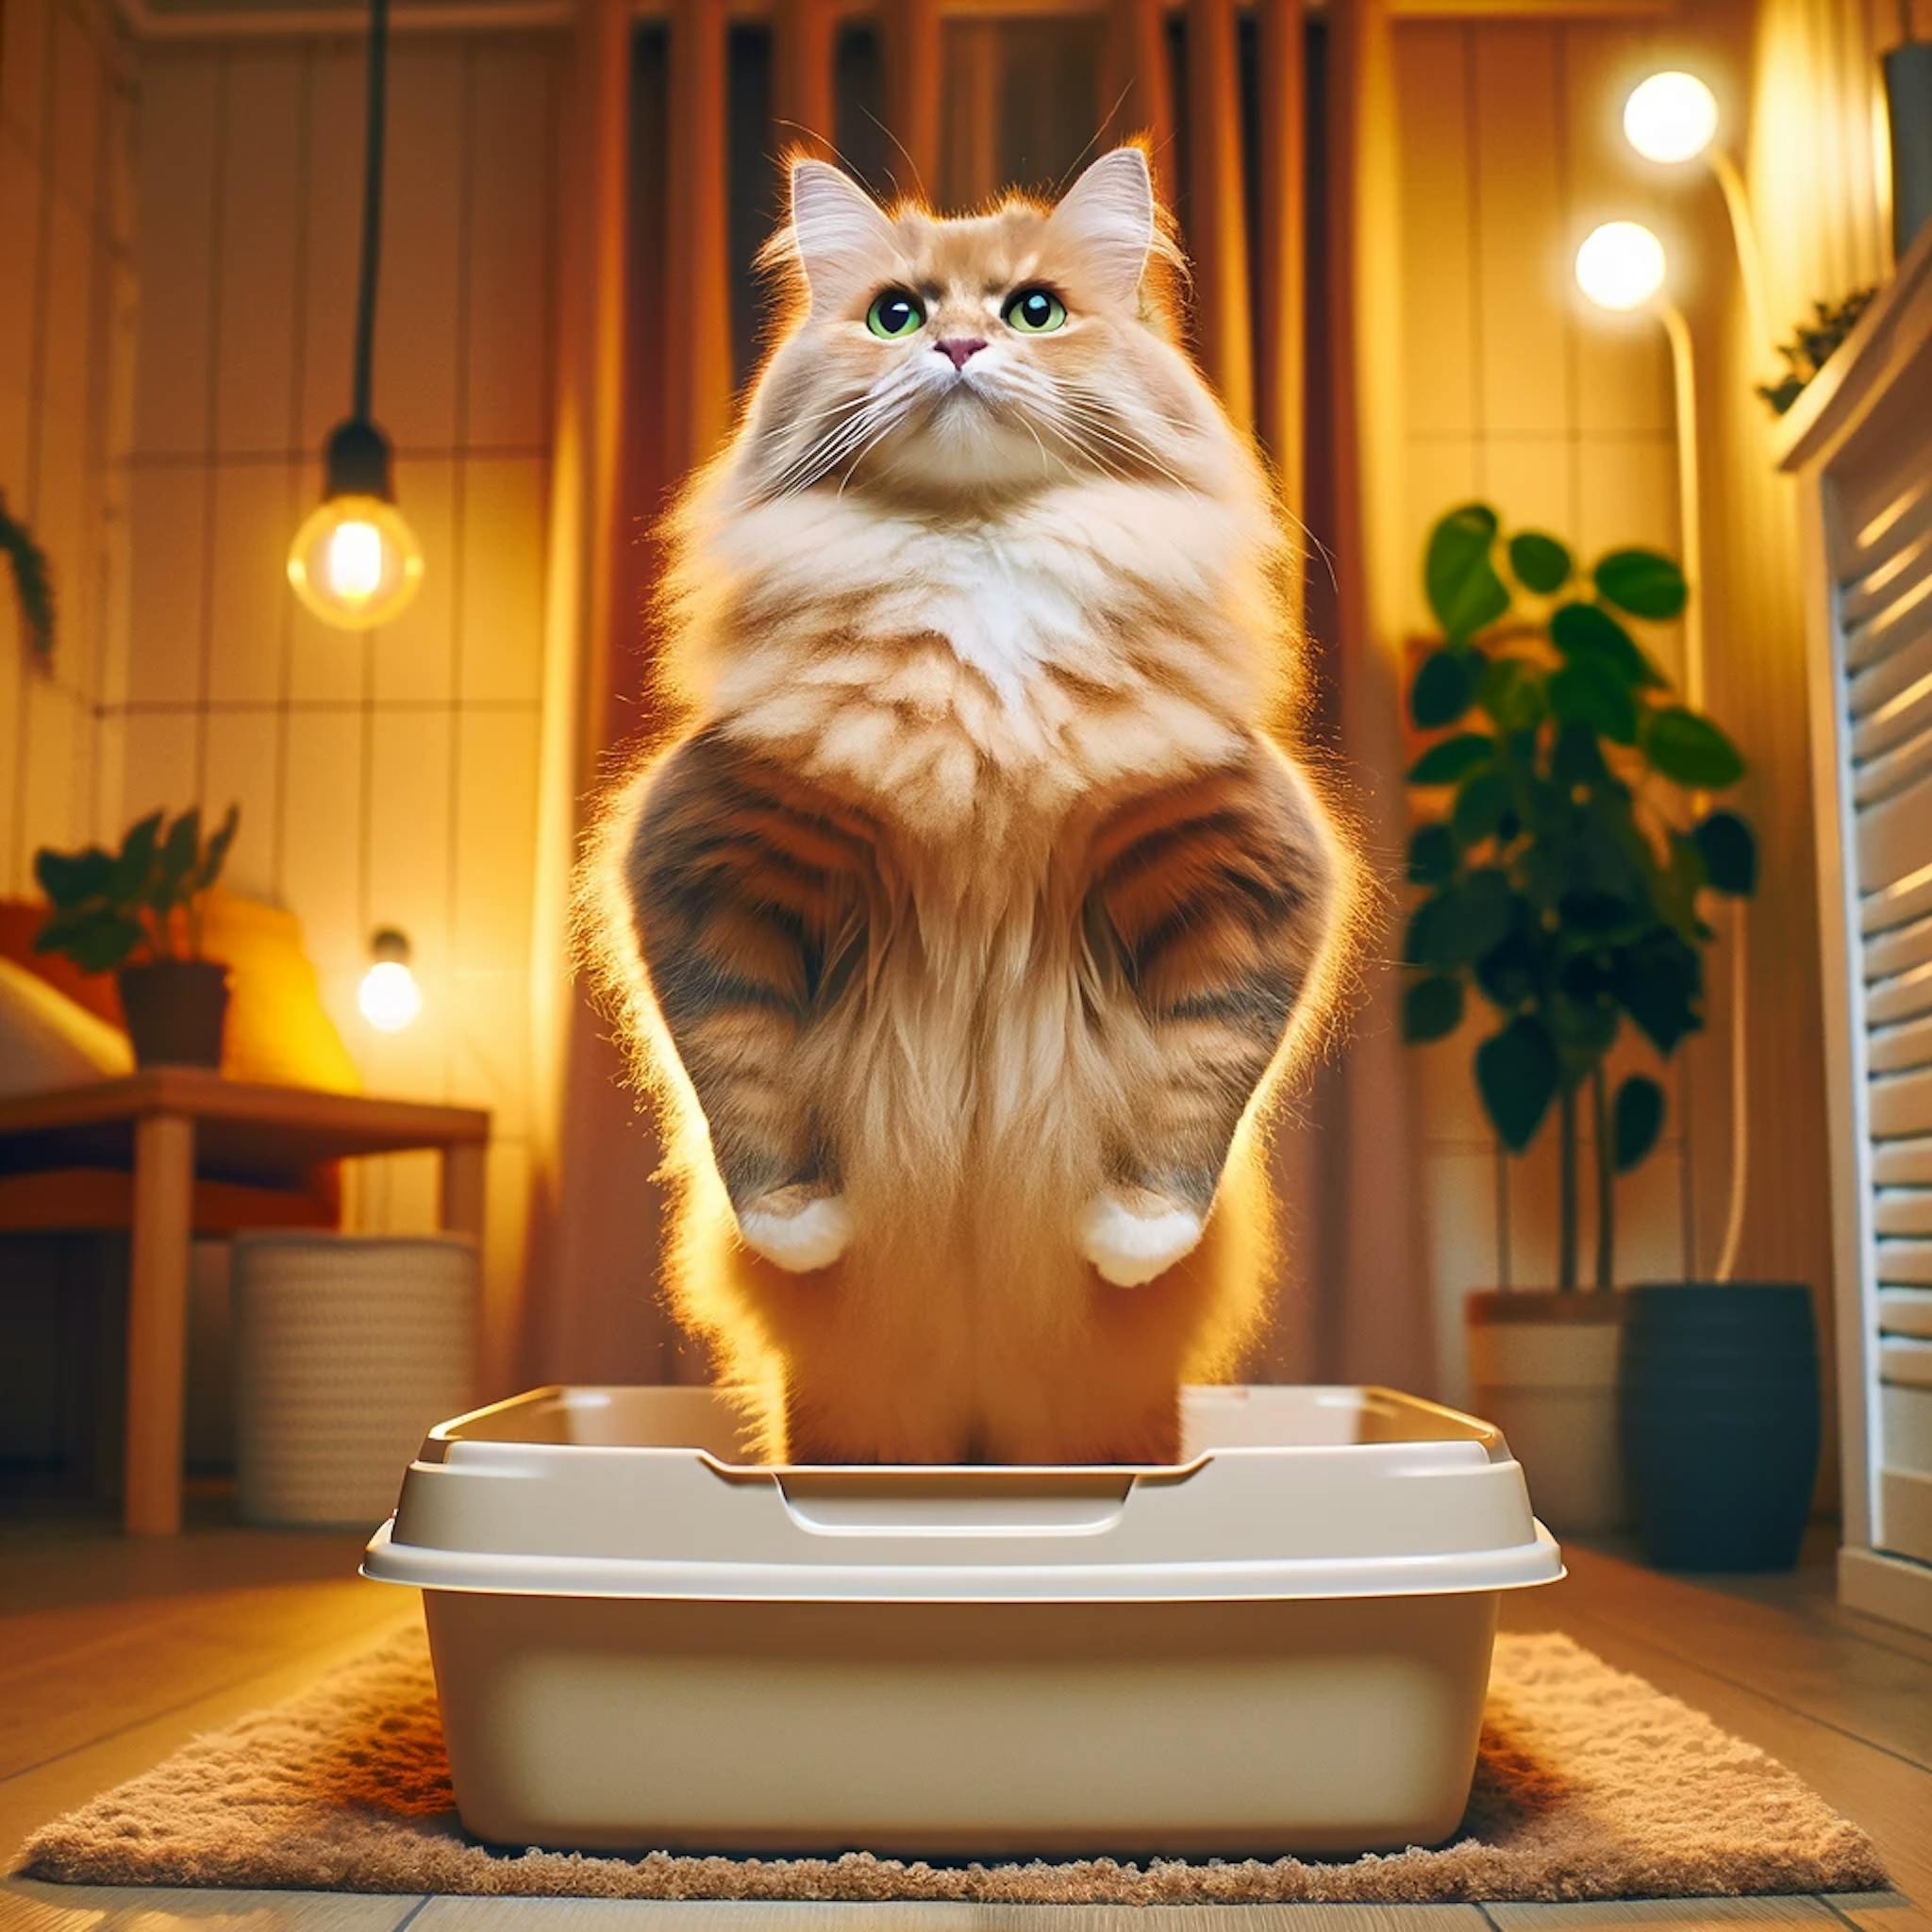 The Purr-fect Guide to Litter Box Success